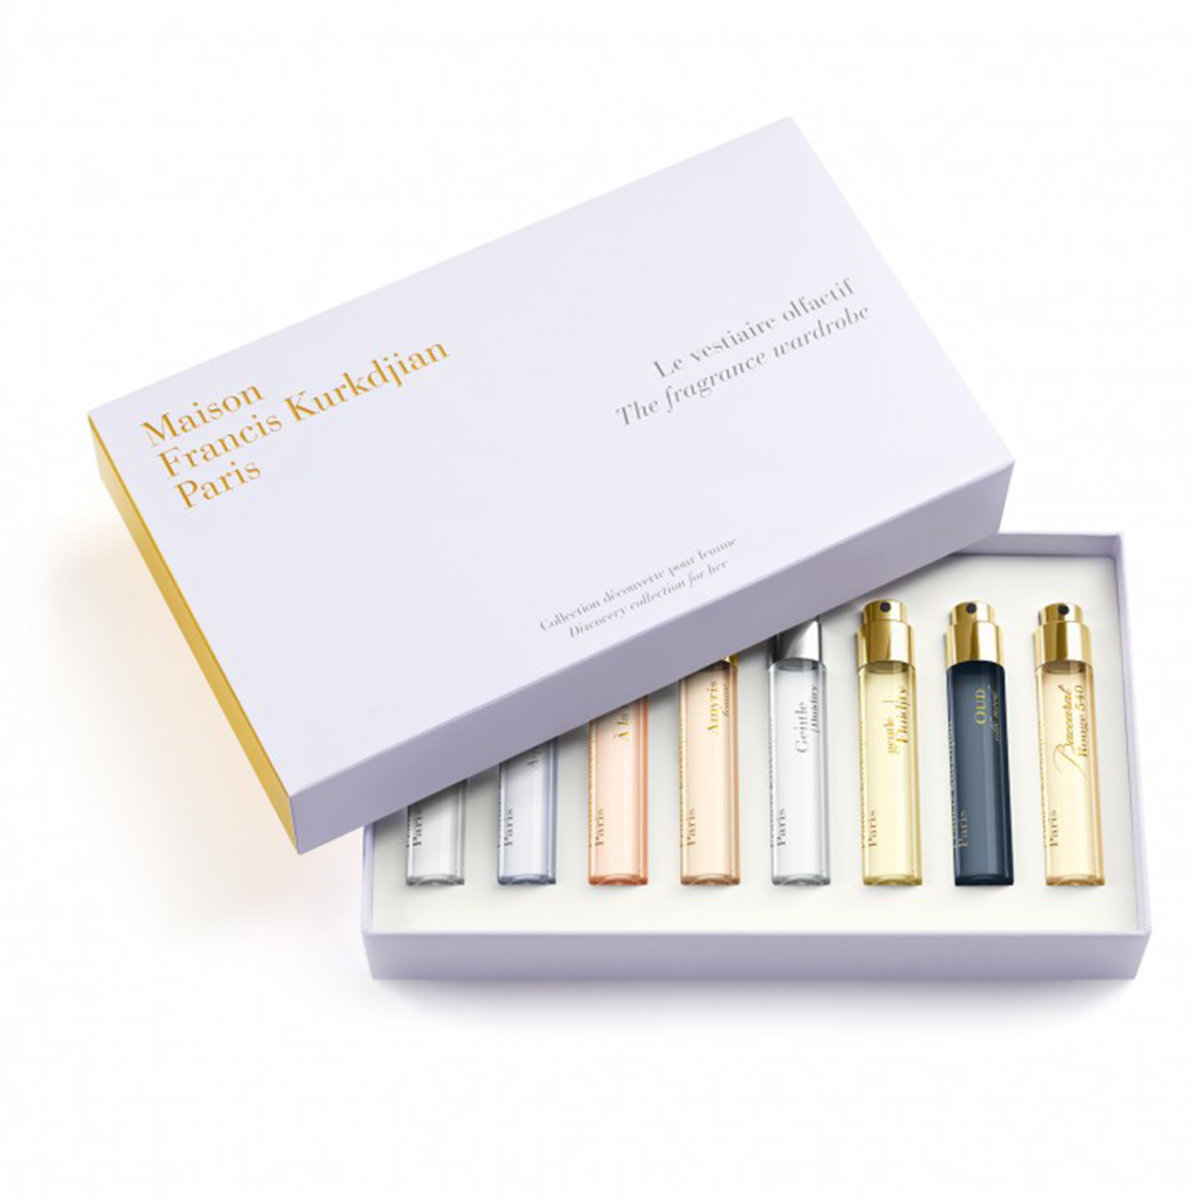 Maison Francis Kurkdjian Fragrance Wardrobe 8-Piece Discovery Collection For Her, $275